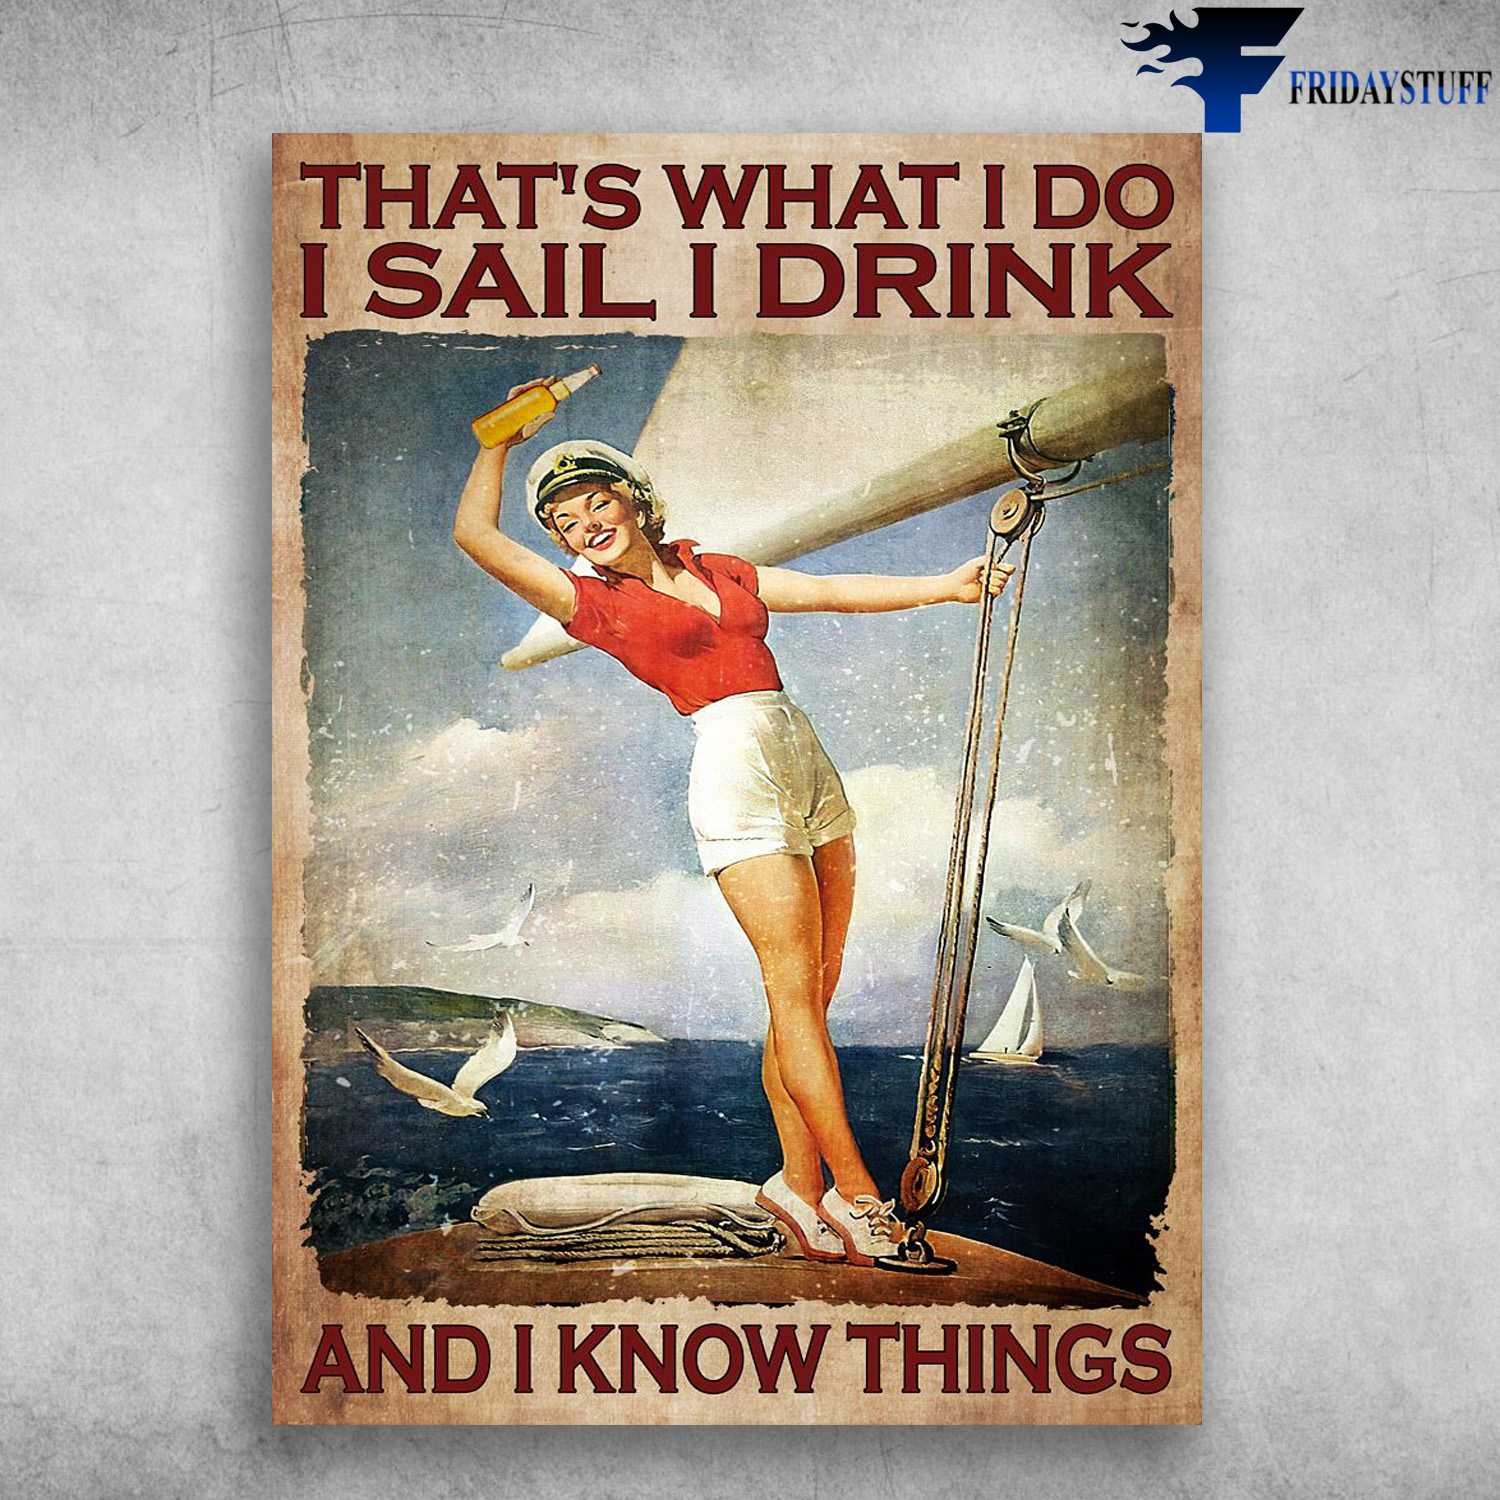 Female Sailor Drink - That What I Do, I Sail, I Drink, And I Know Things, Beer Drinking